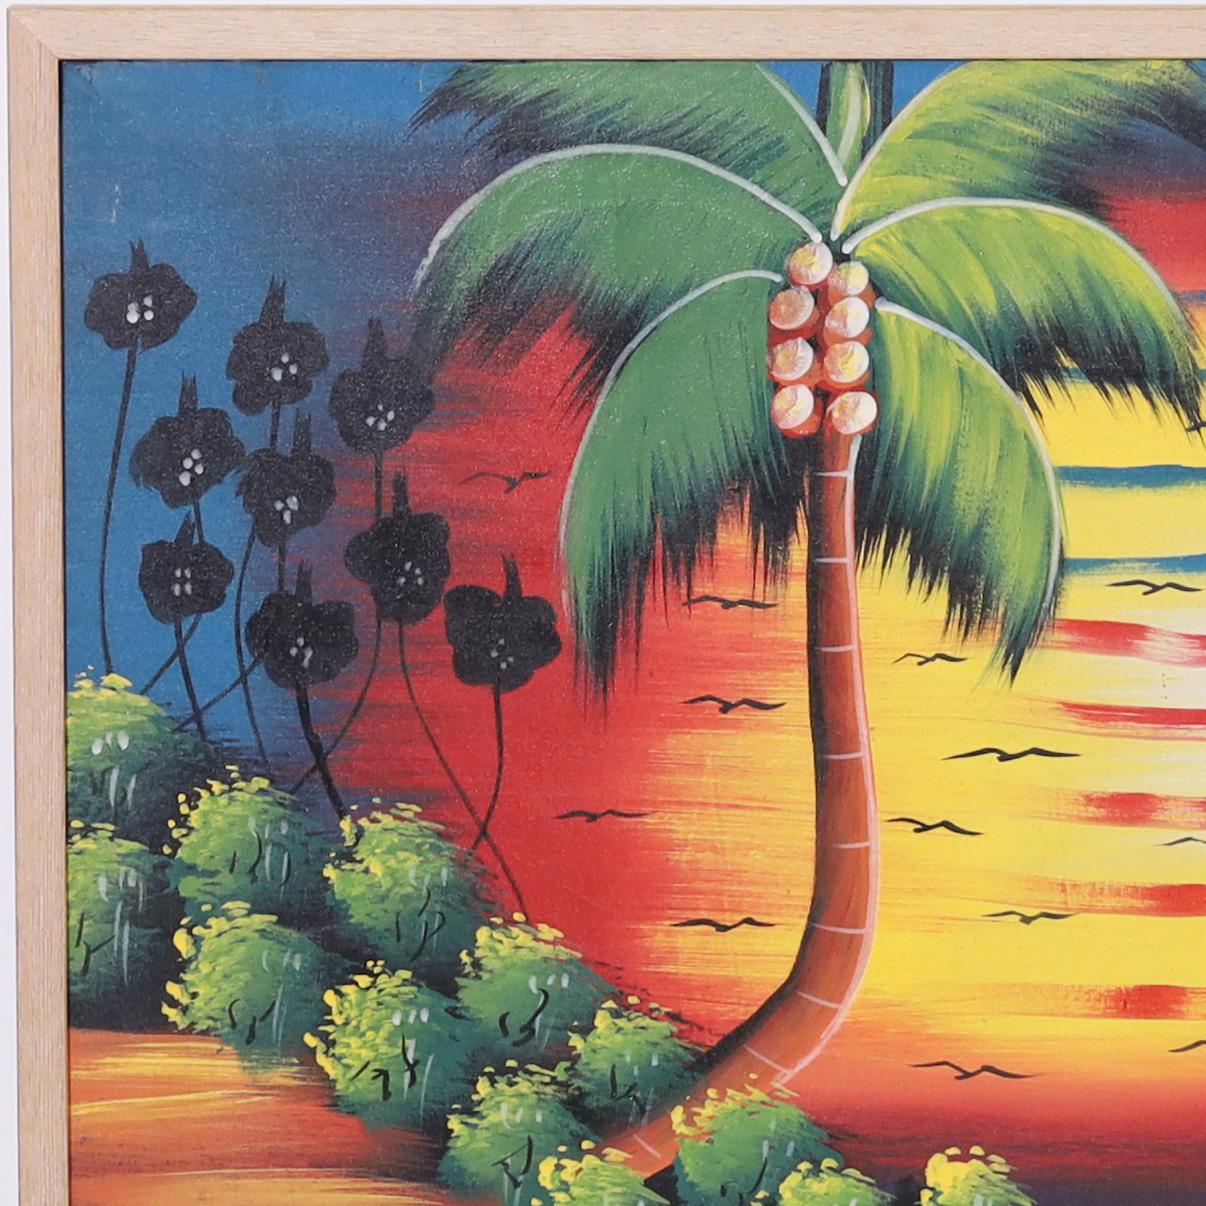 Bold eye-catching Haitian acrylic painting on canvas executed in a distinctive playful naive technique depicting boats and palm trees against a flaming sunset. Signed M. Mar in the lower right.